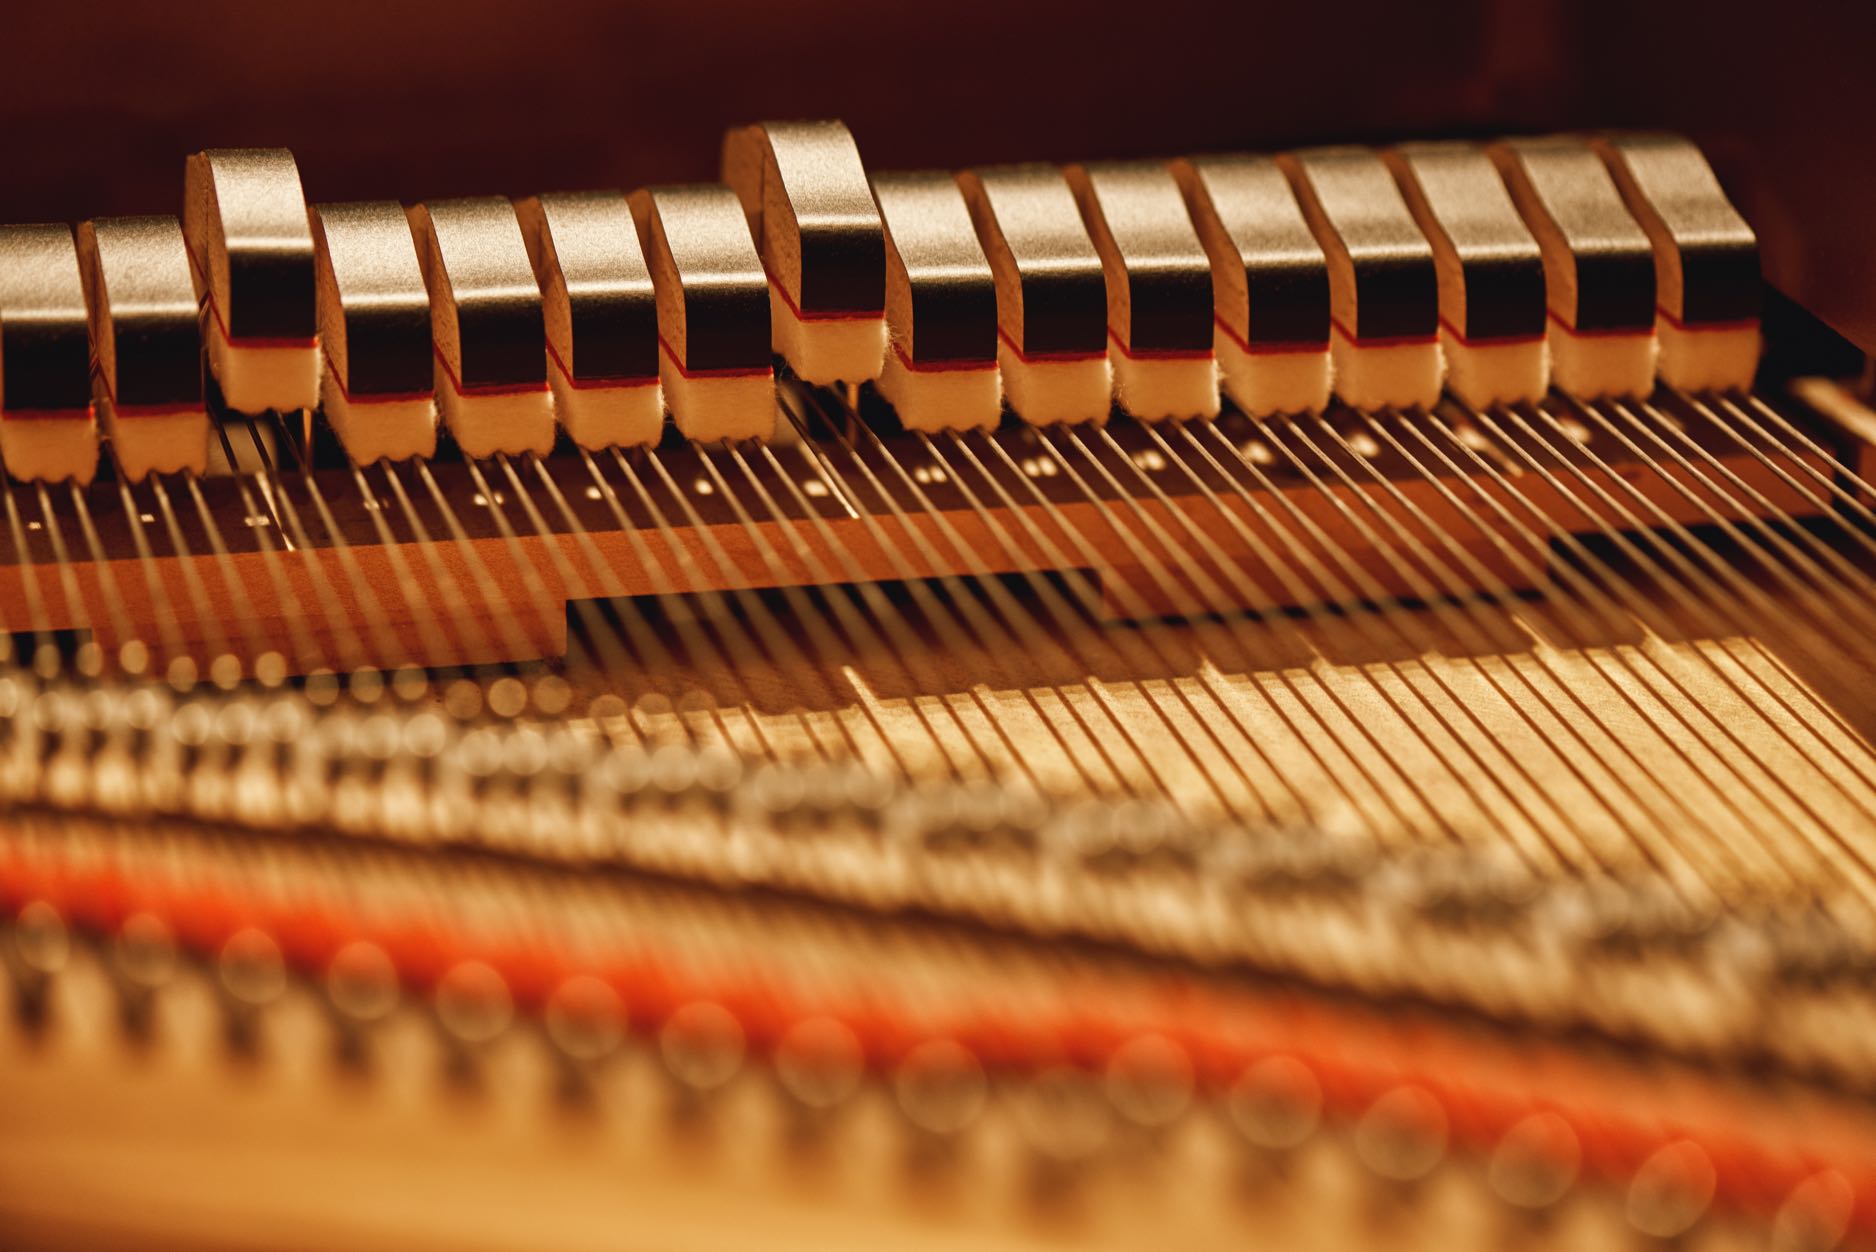 A grand piano's dampers are raised as a key is held.